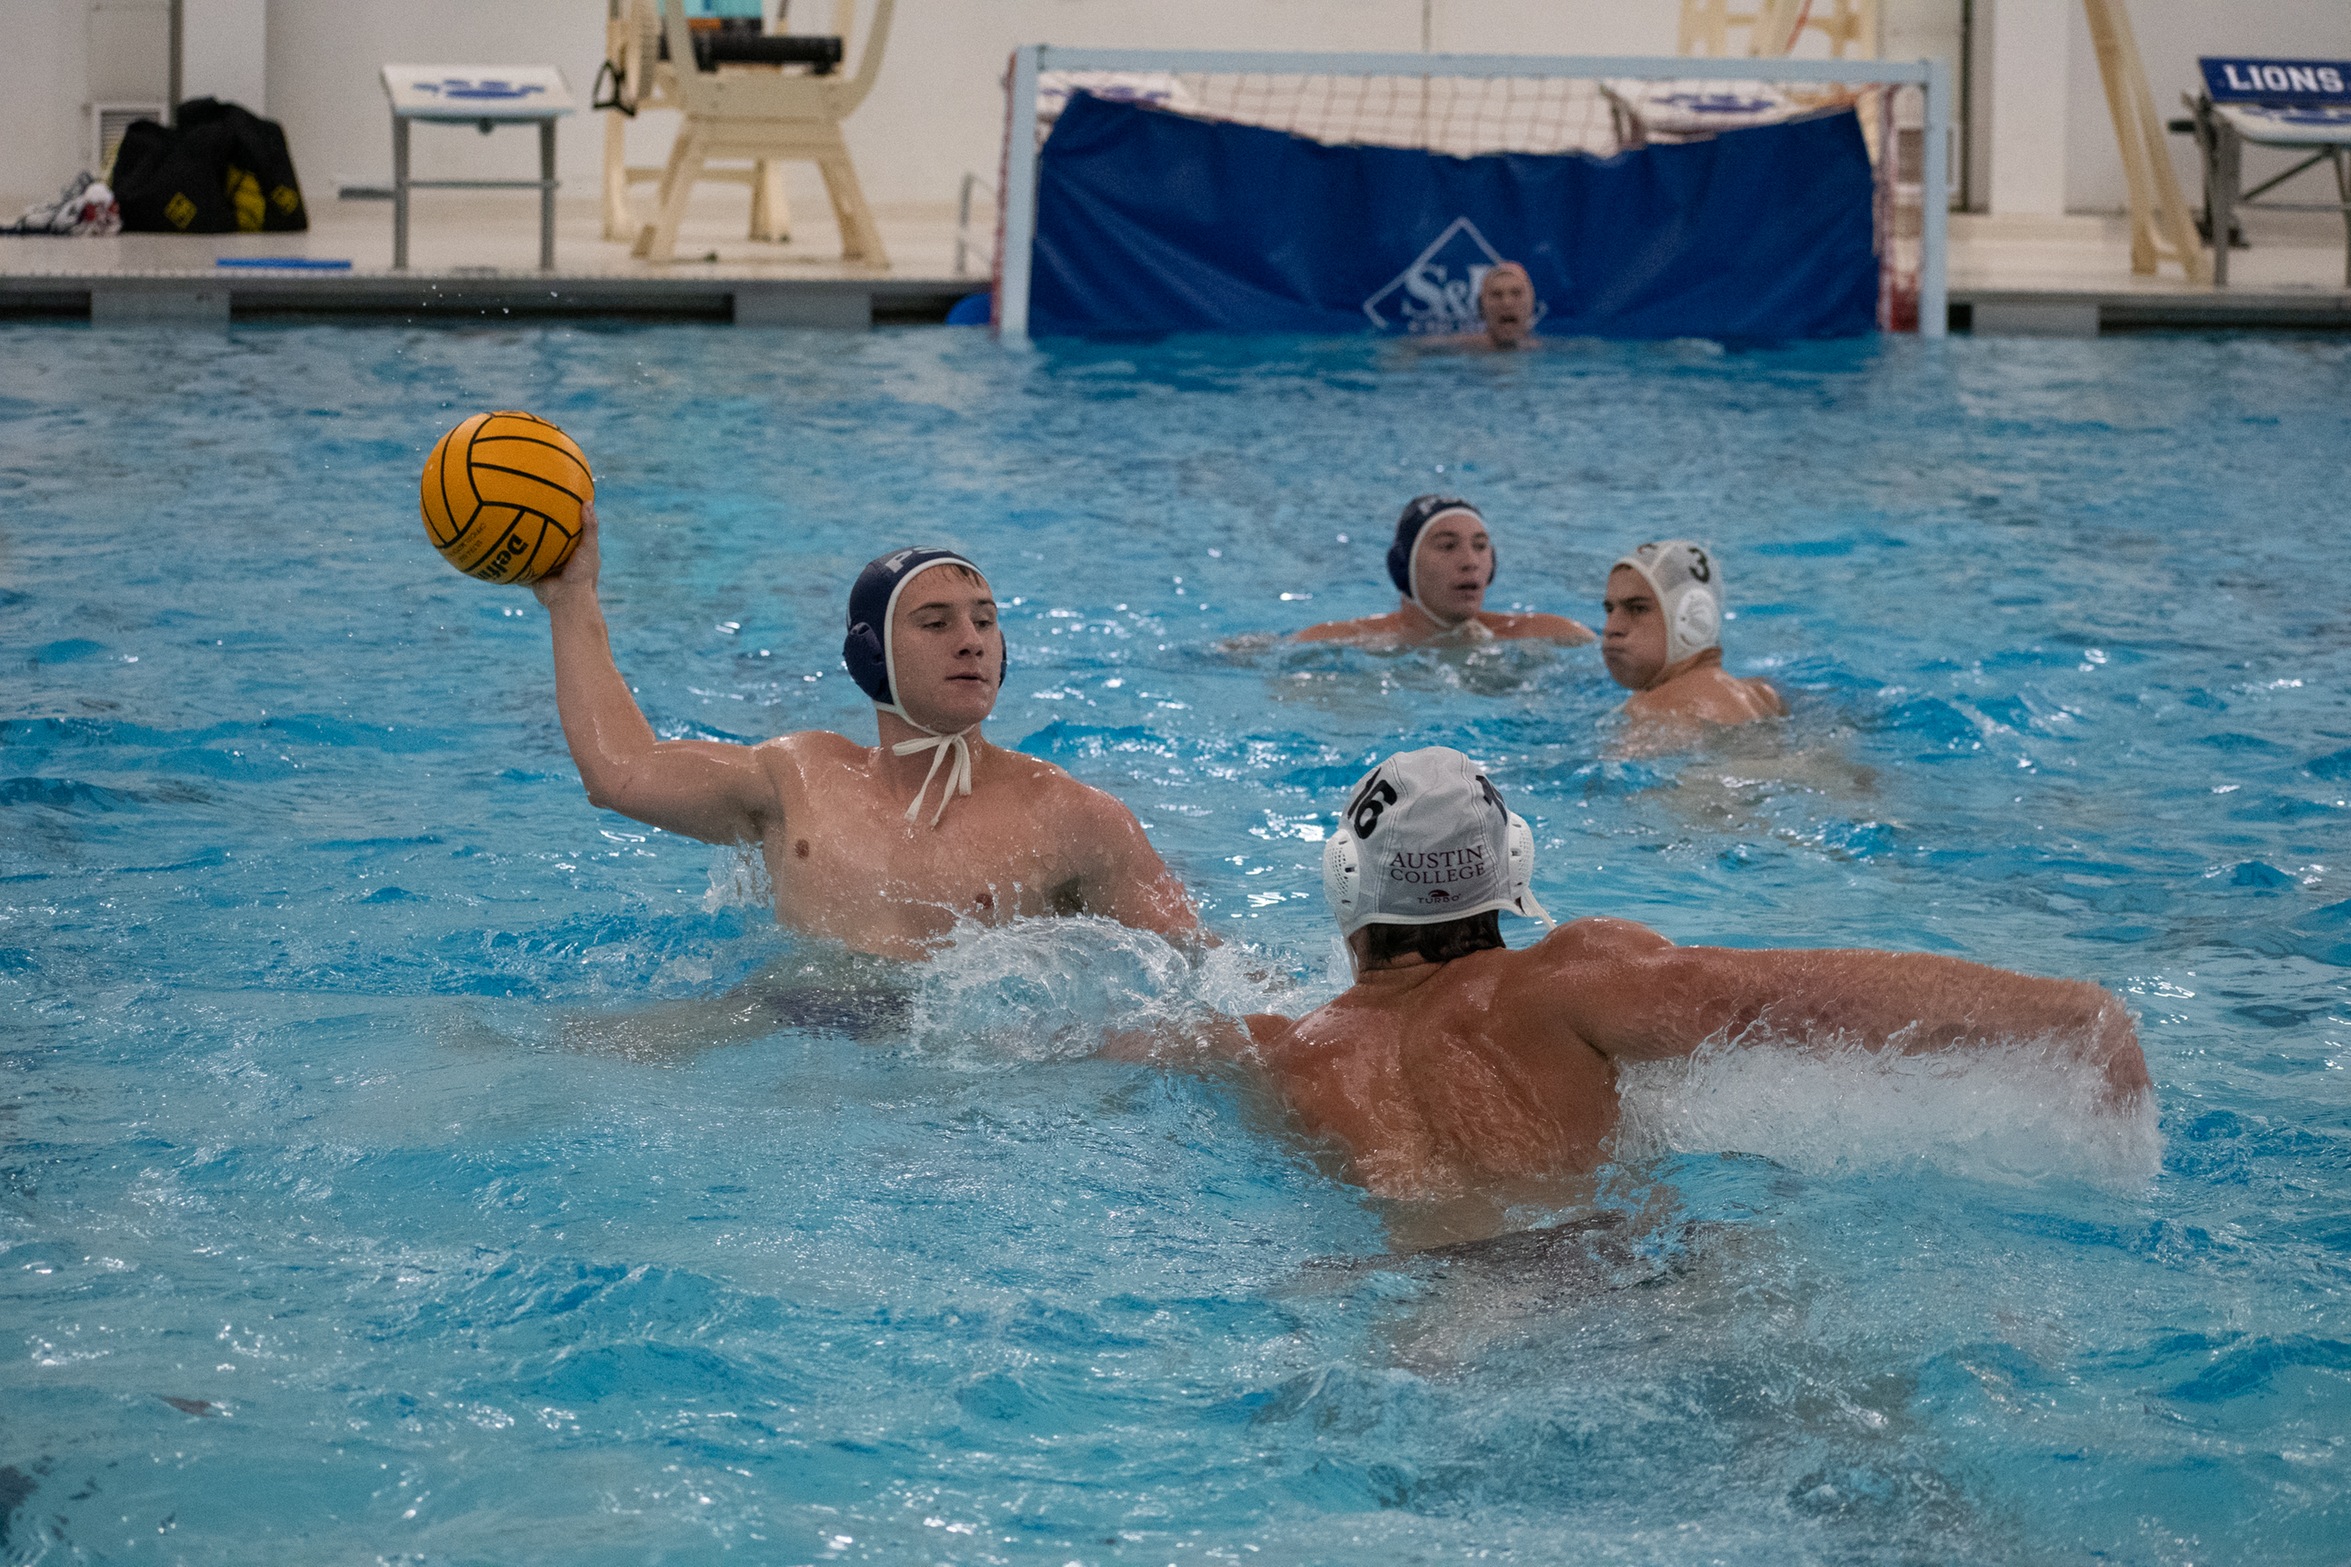 Washington & Jefferson Edges Behrend To Conclude Conference Championships